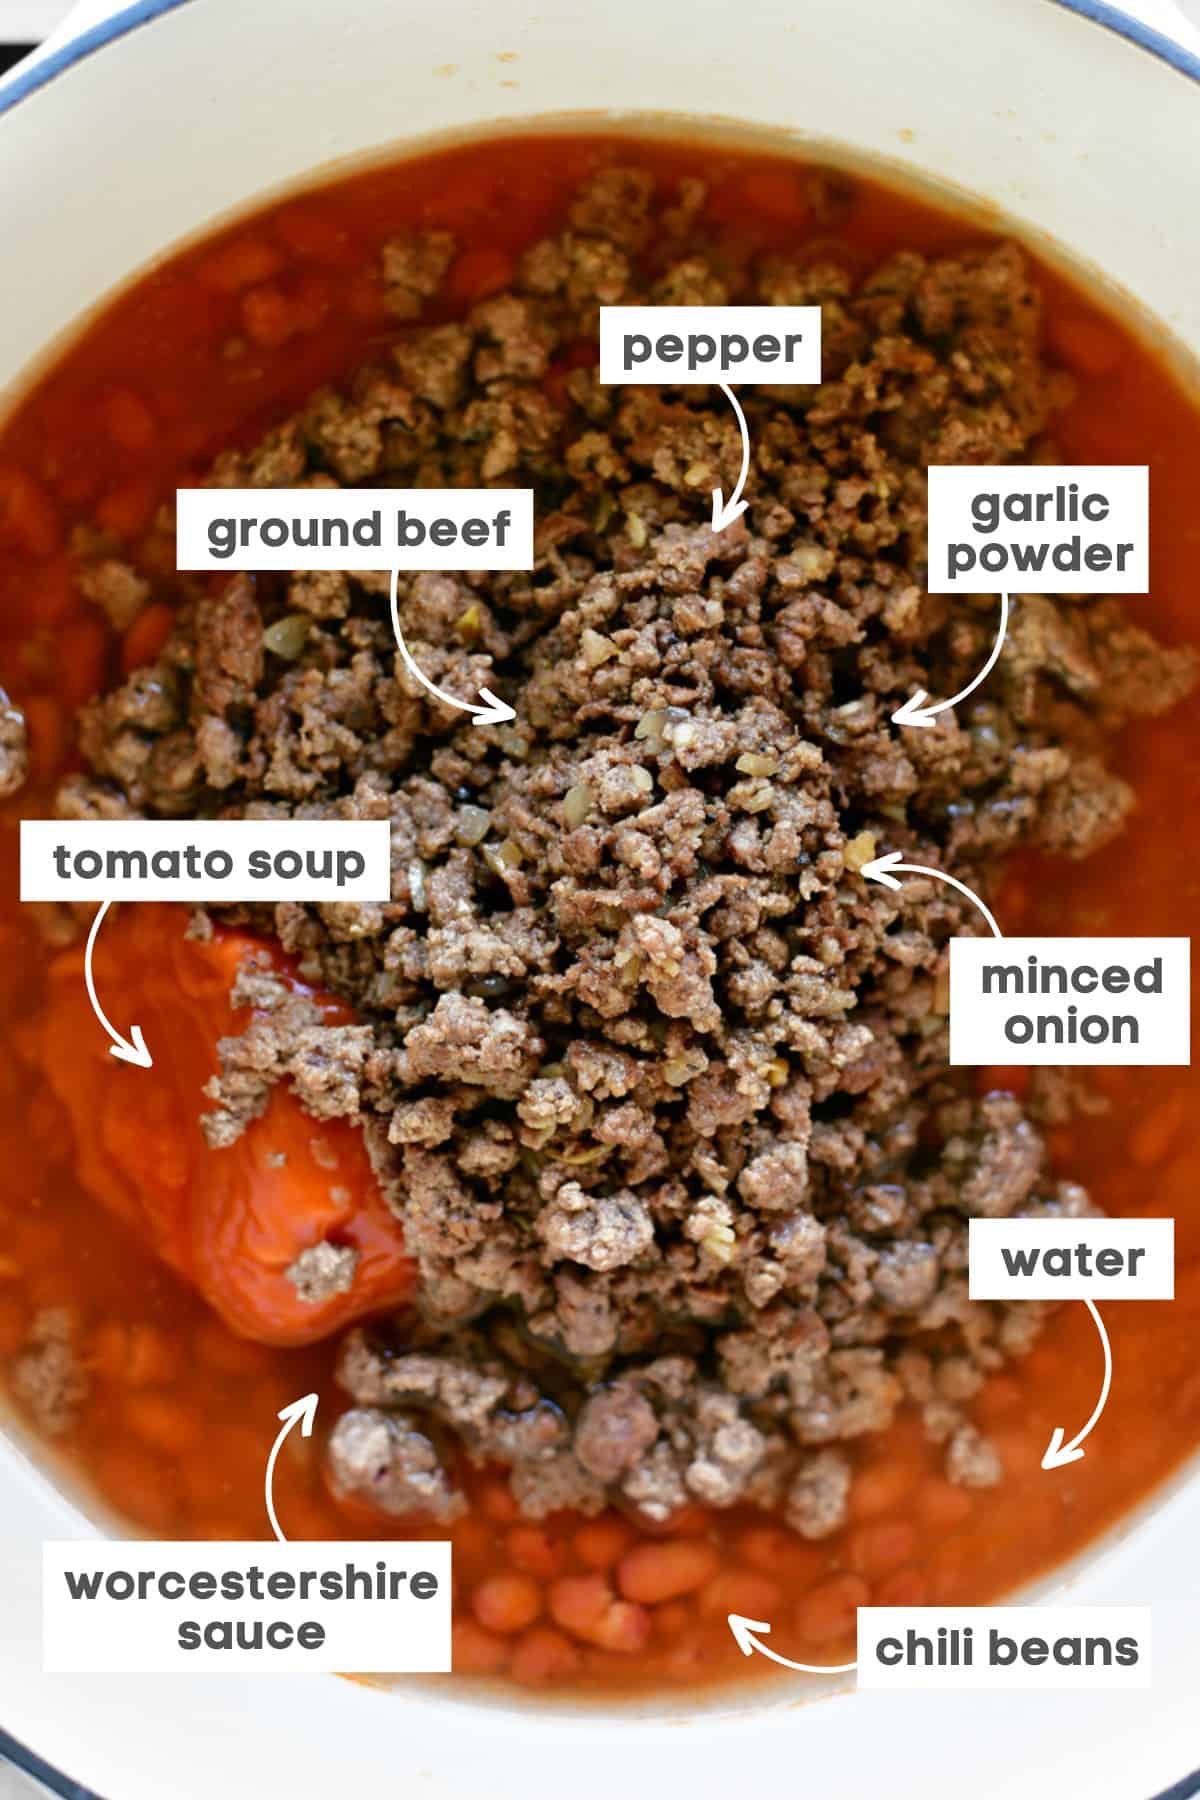 Ingredients in a large pot.